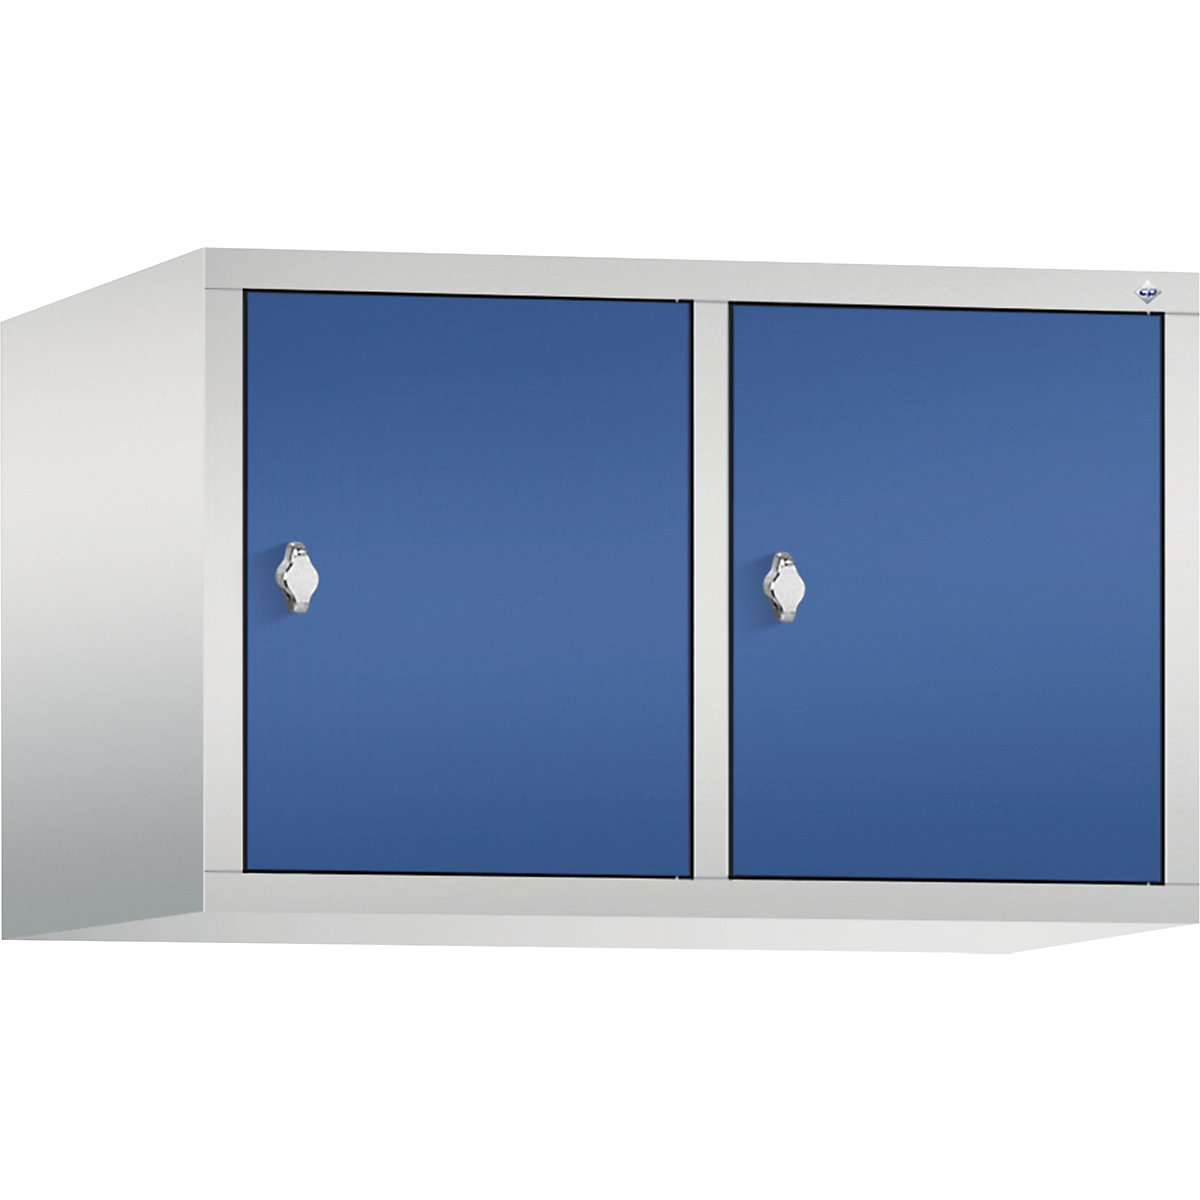 CLASSIC add-on cupboard – C+P, 2 compartments, compartment width 400 mm, light grey / gentian blue-10